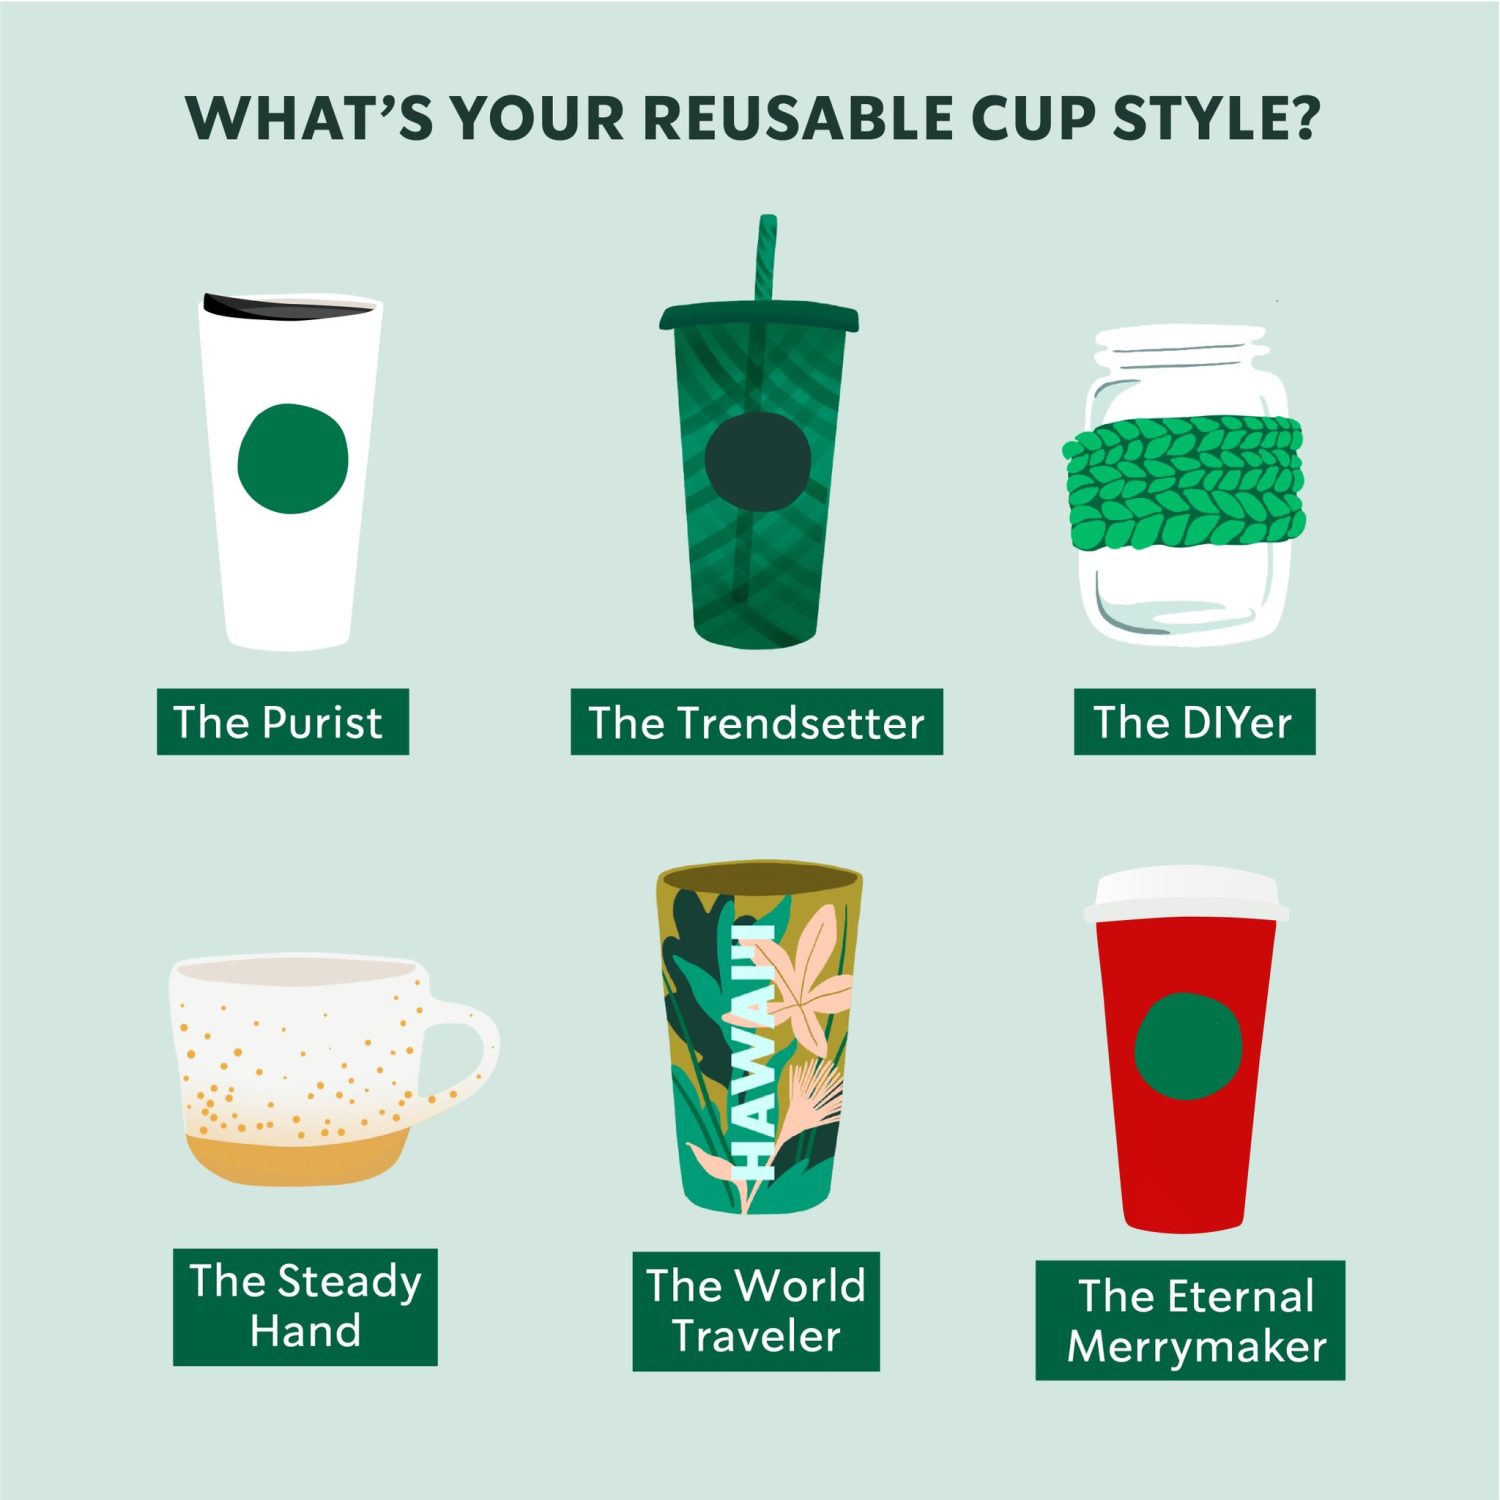 Starbucks will now let customers use personal cups for nearly all